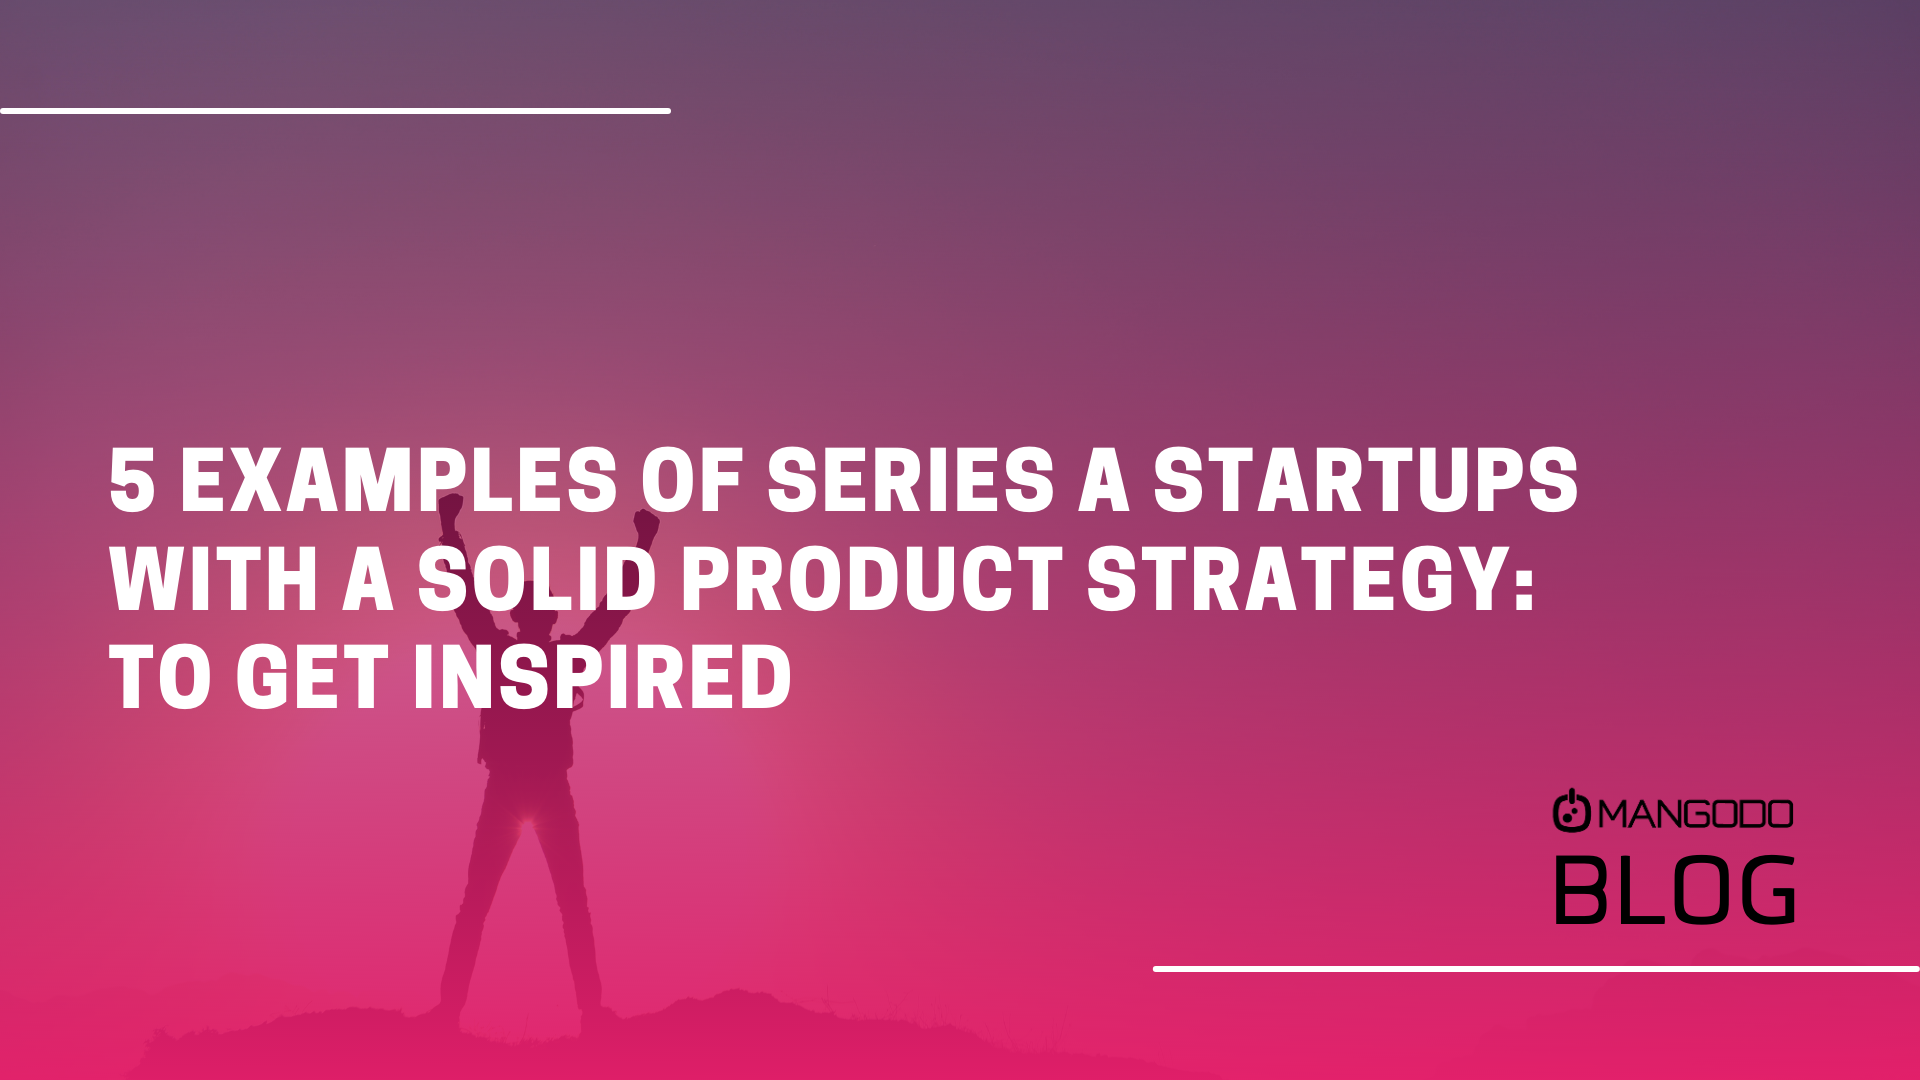 5 Examples Of Series A Startups With a Solid Product Strategy: To Get Inspired